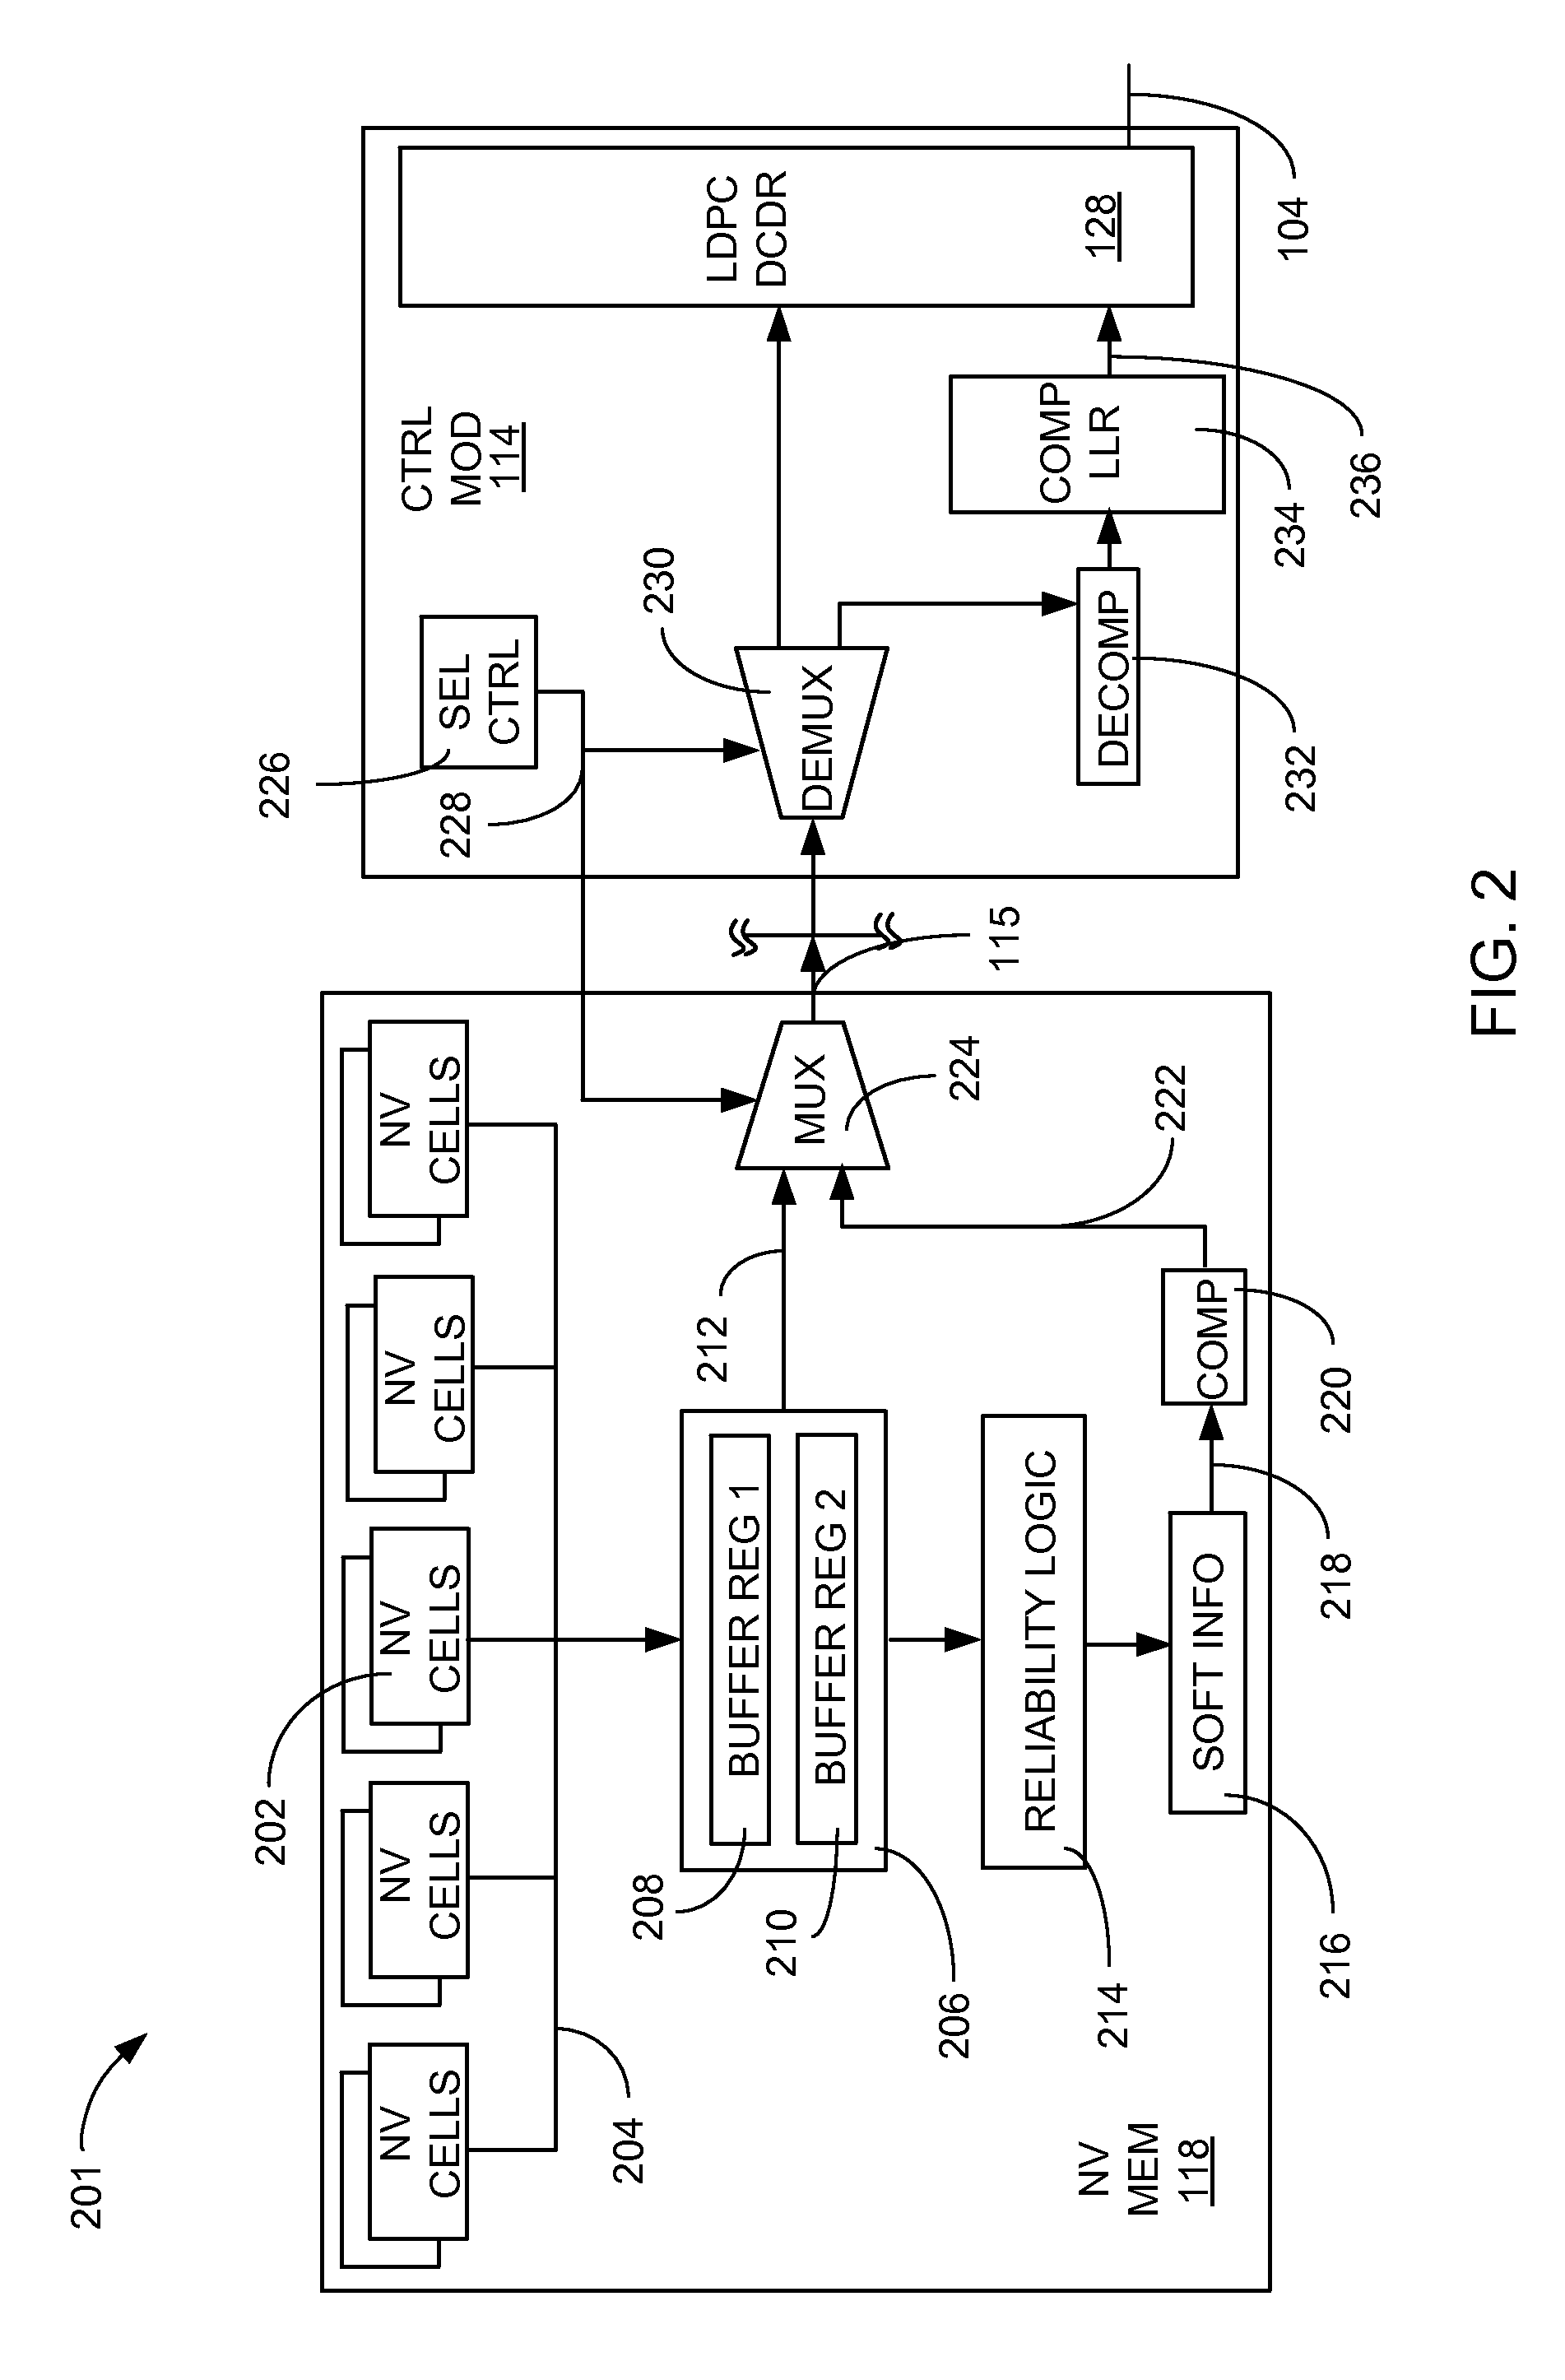 Method and system for improving data integrity in non-volatile storage